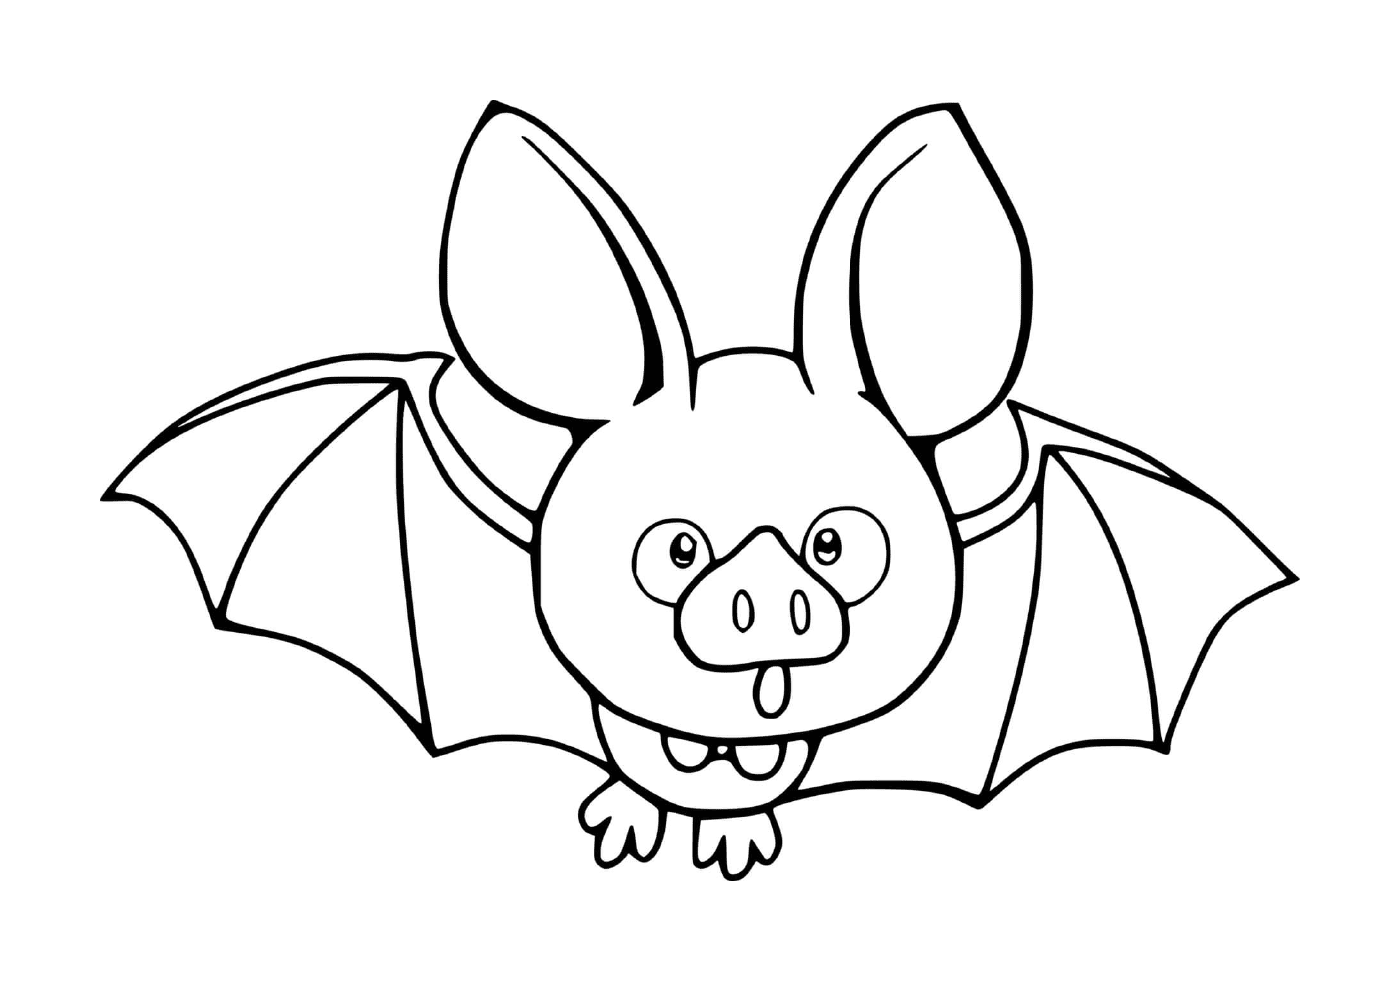  flying bat with a pig nose 